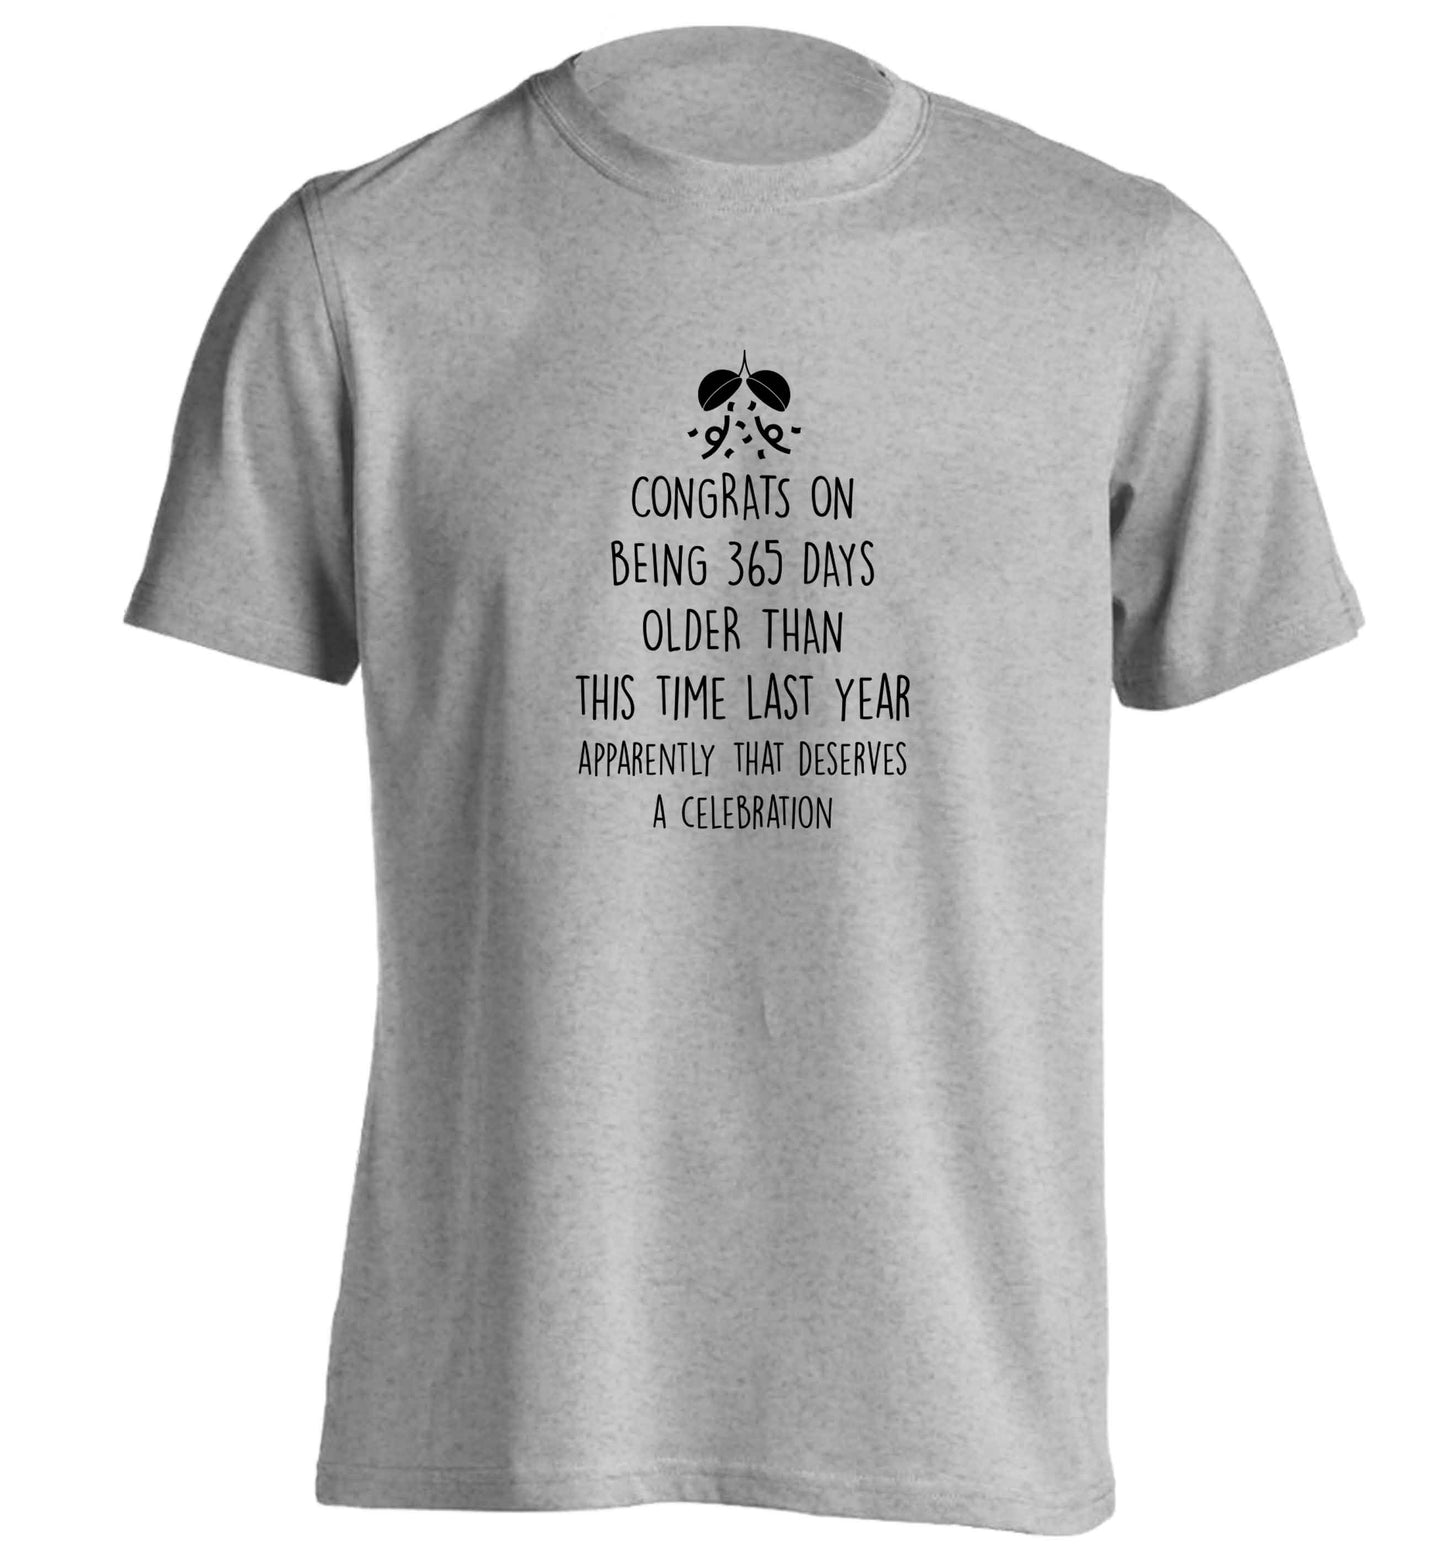 Congrats on being 365 days older than you were this time last year apparently that deserves a celebration adults unisex grey Tshirt 2XL